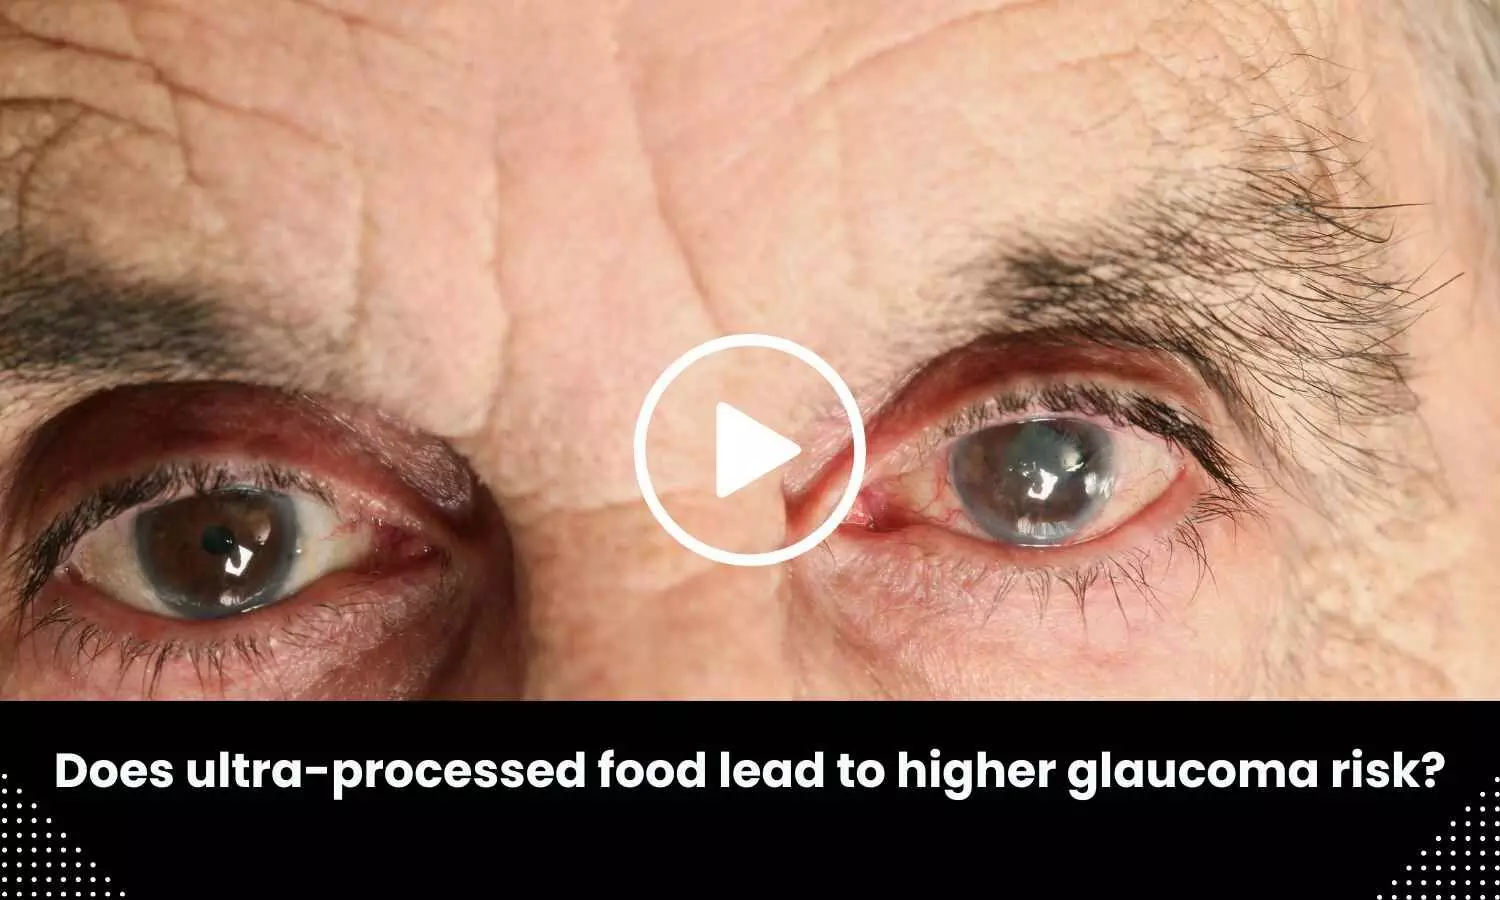 Does ultra-processed food lead to higher glaucoma risk?